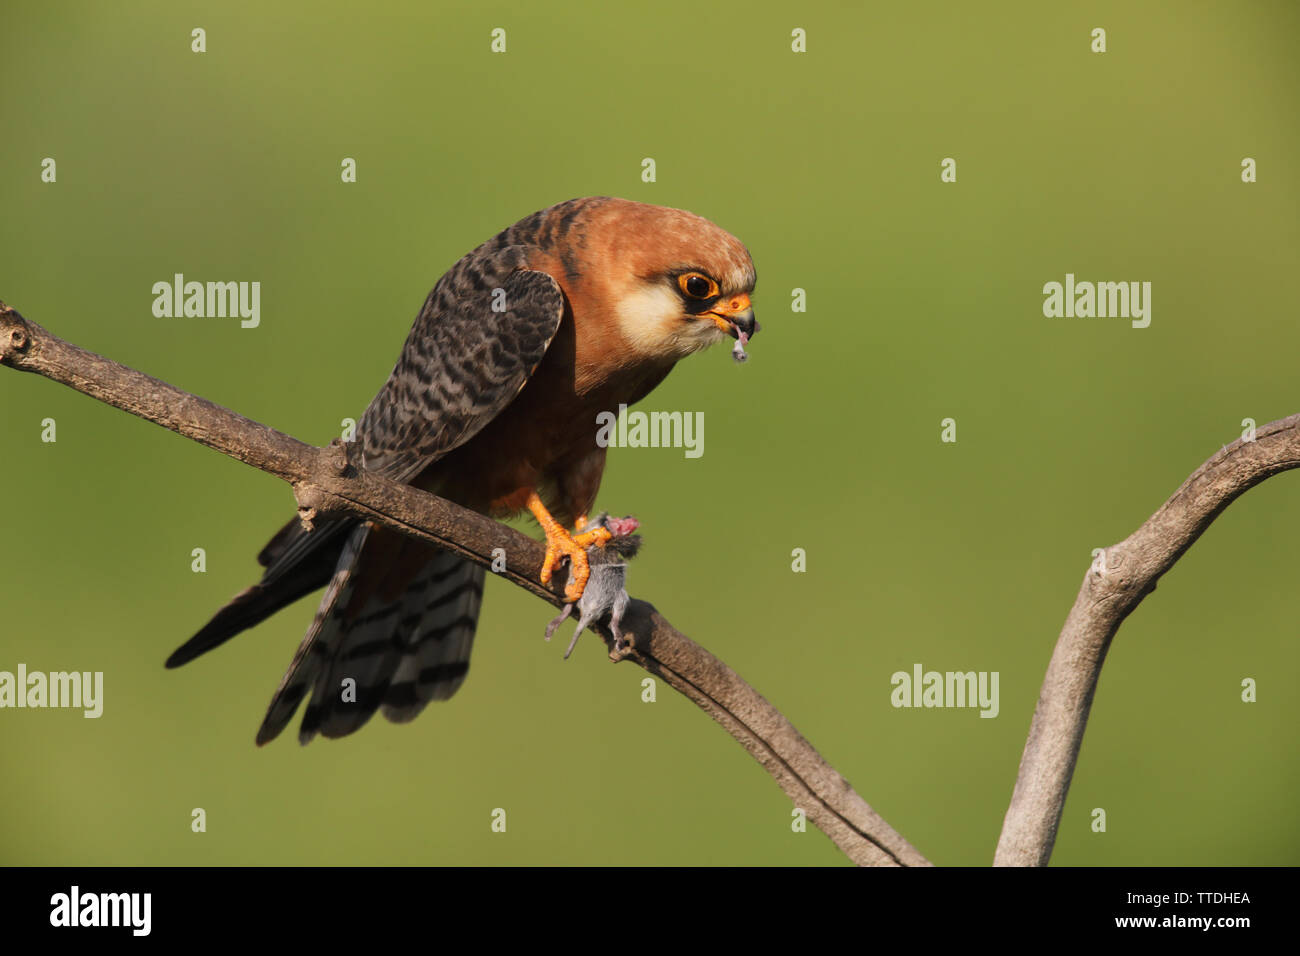 Female  Red-footed falcon (Falco vespertinus) with prey (a mouse). Photographed at Hortobagy, Hungary Stock Photo